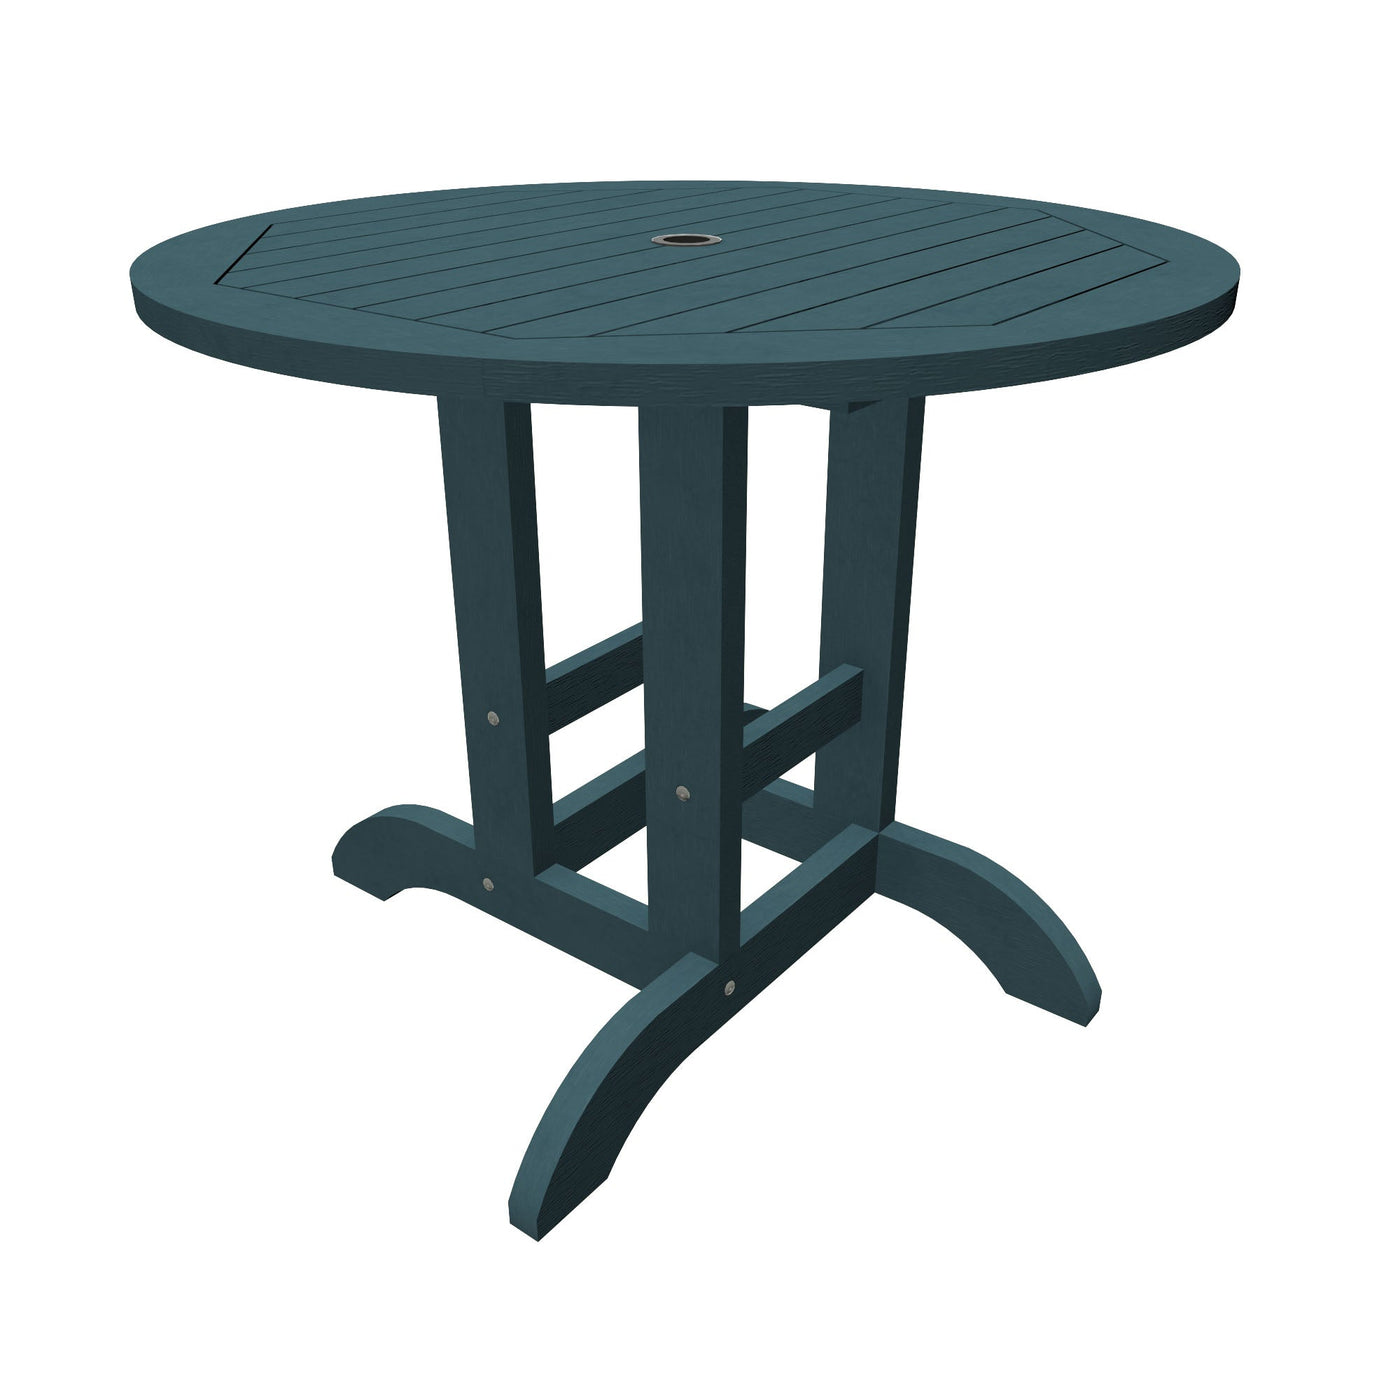 Commercial Grade 36-inch Round Bistro Dining Height Table Sequoia Professional Nantucket Blue 